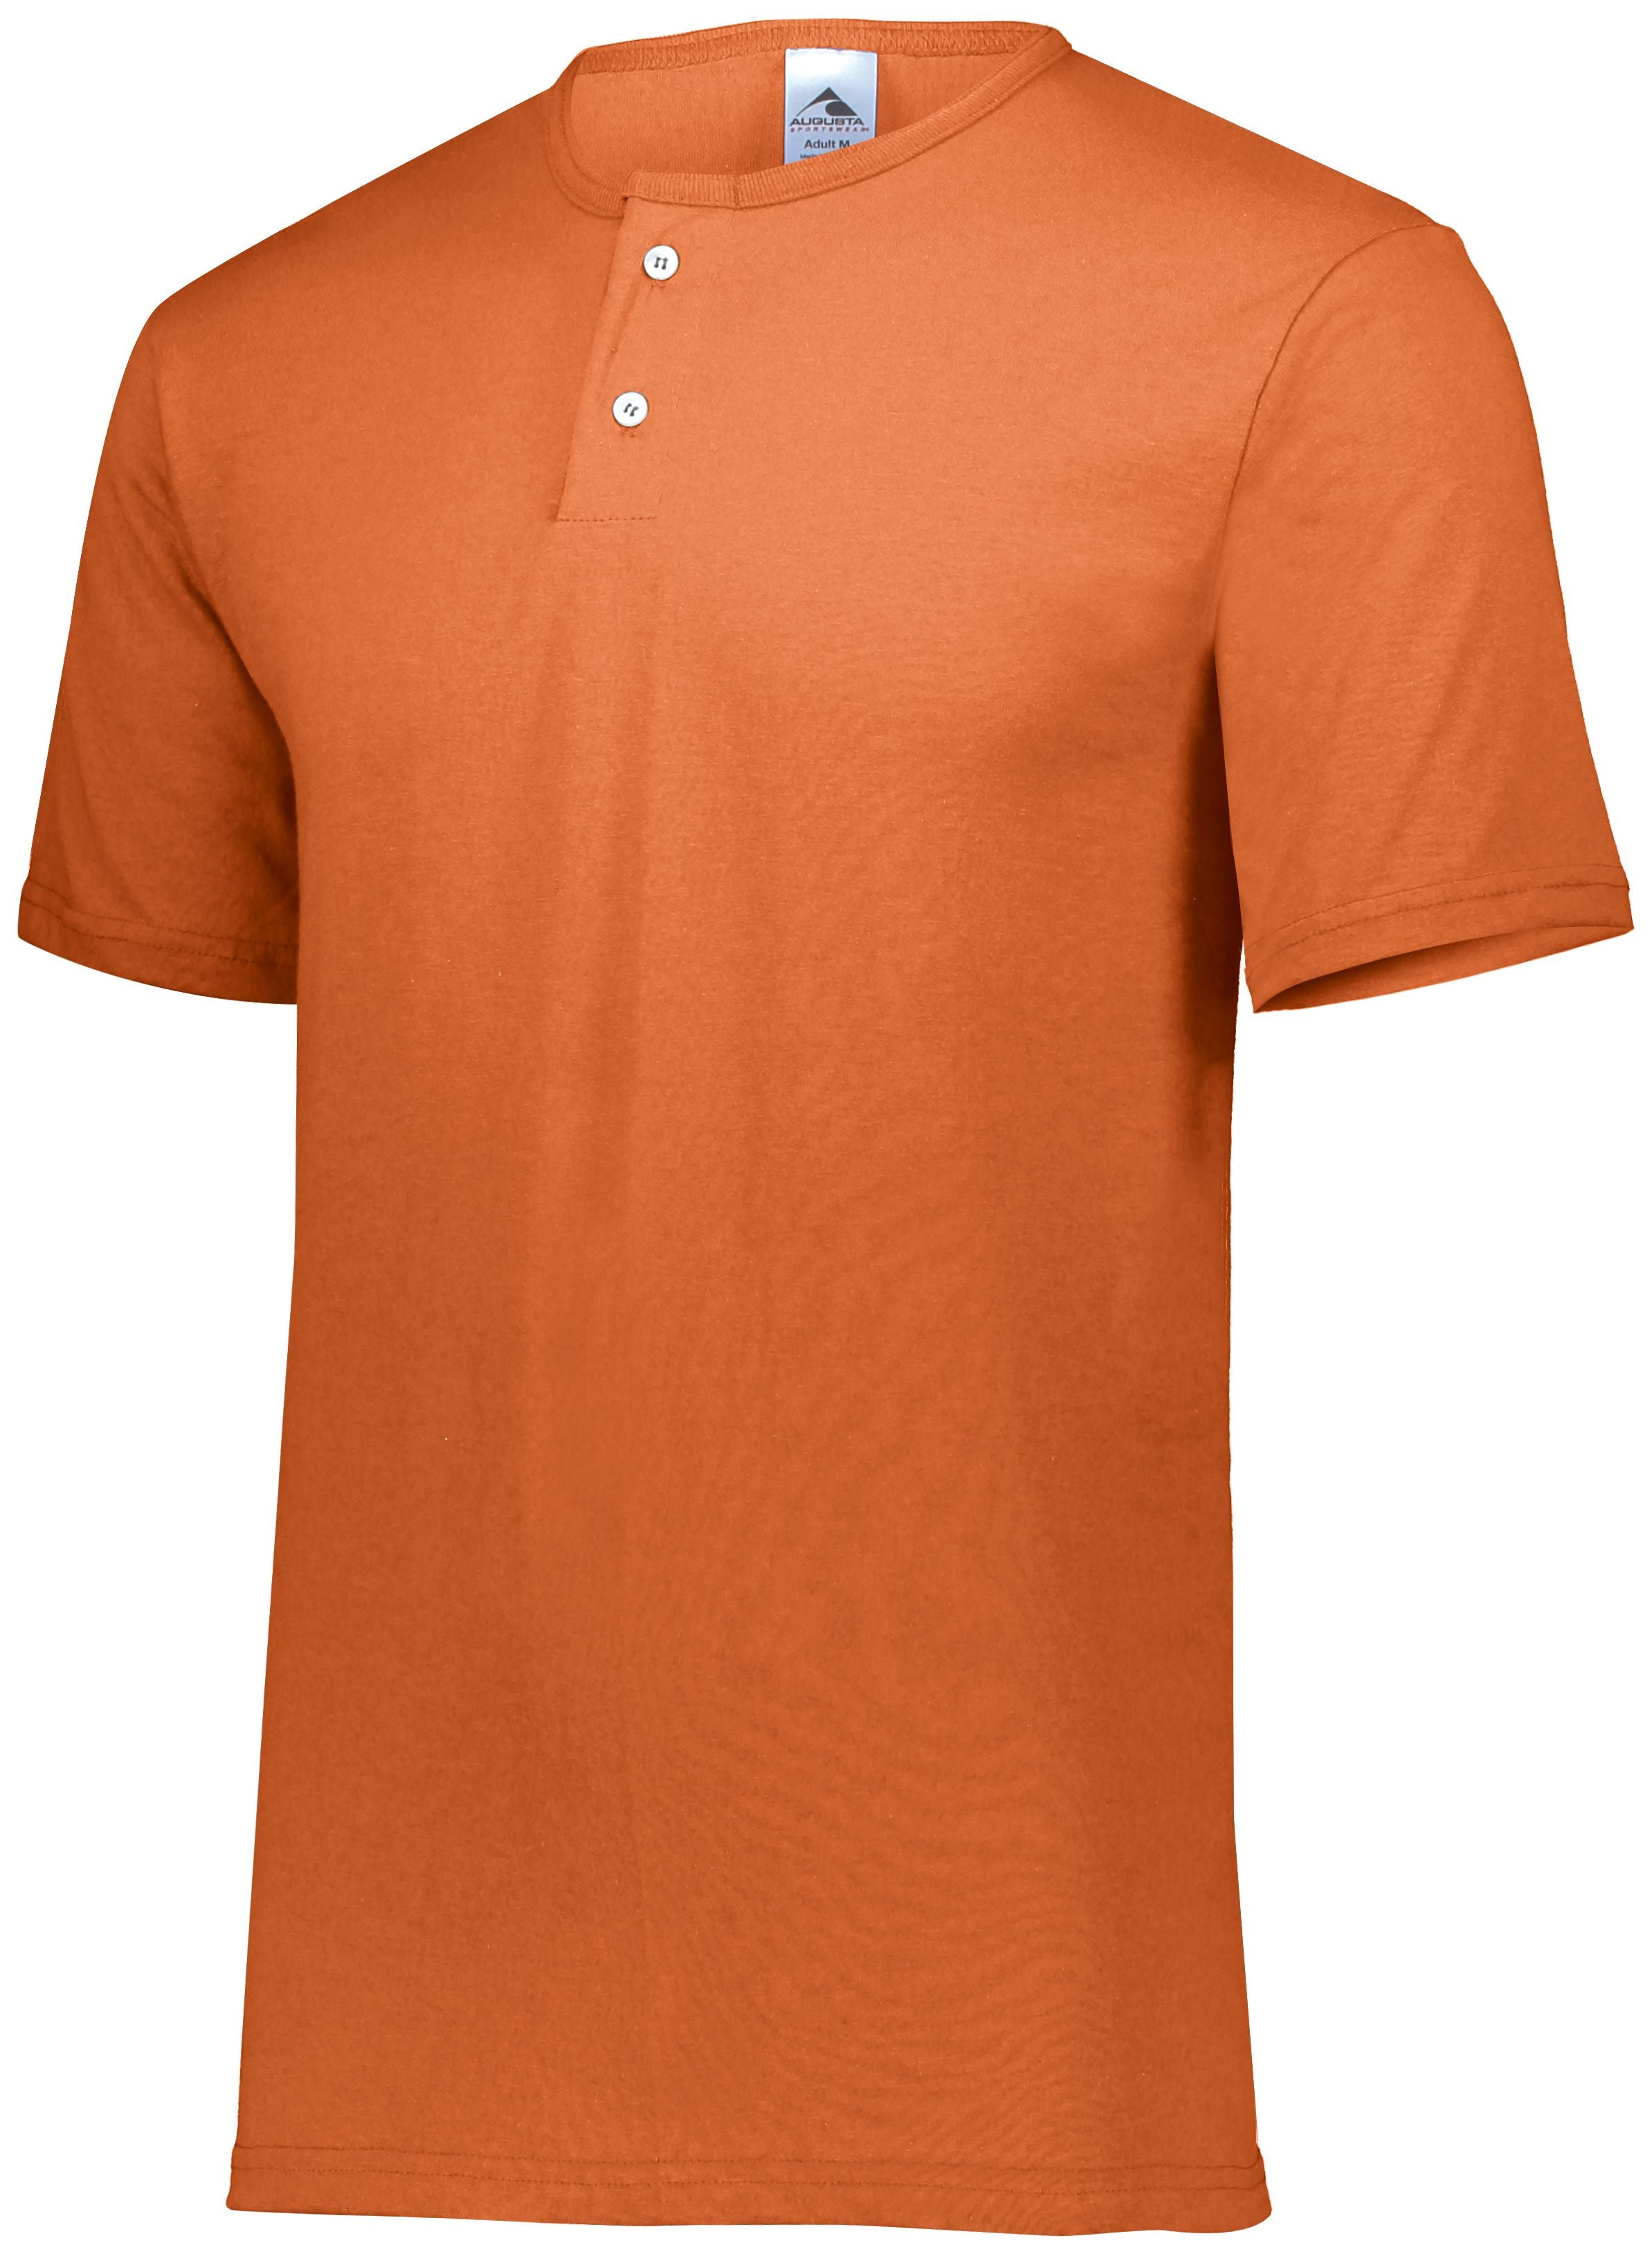 Augusta Sportswear Youth Two-Button Baseball Jersey in Orange  -Part of the Youth, Youth-Jersey, Augusta-Products, Baseball, Shirts, All-Sports, All-Sports-1 product lines at KanaleyCreations.com